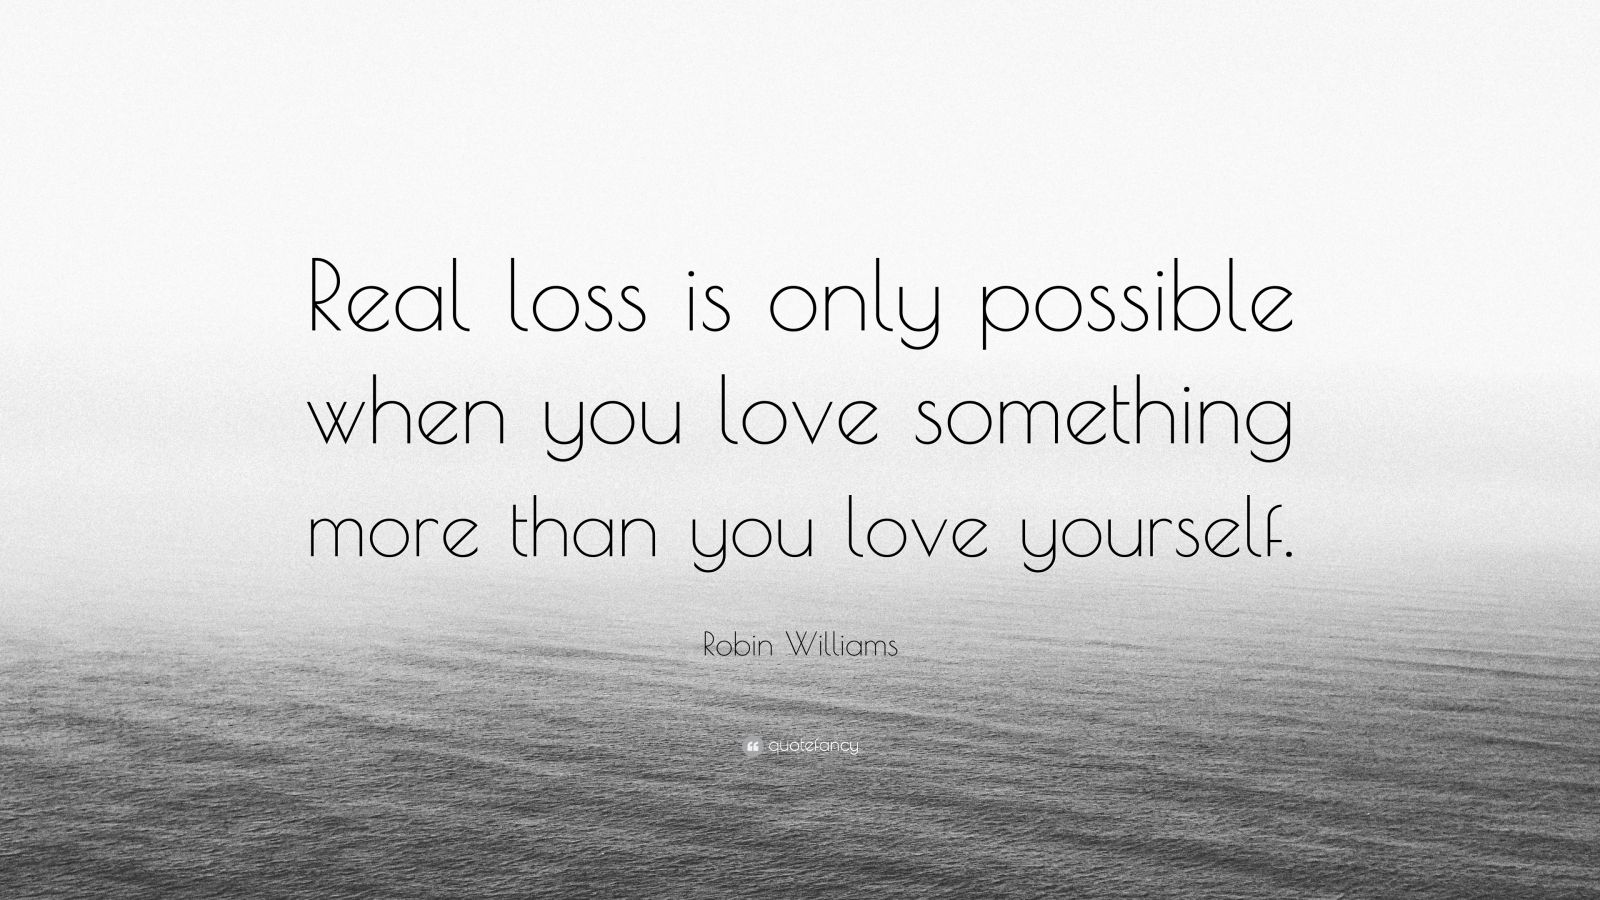 Robin Williams Quote “Real loss is only possible when you